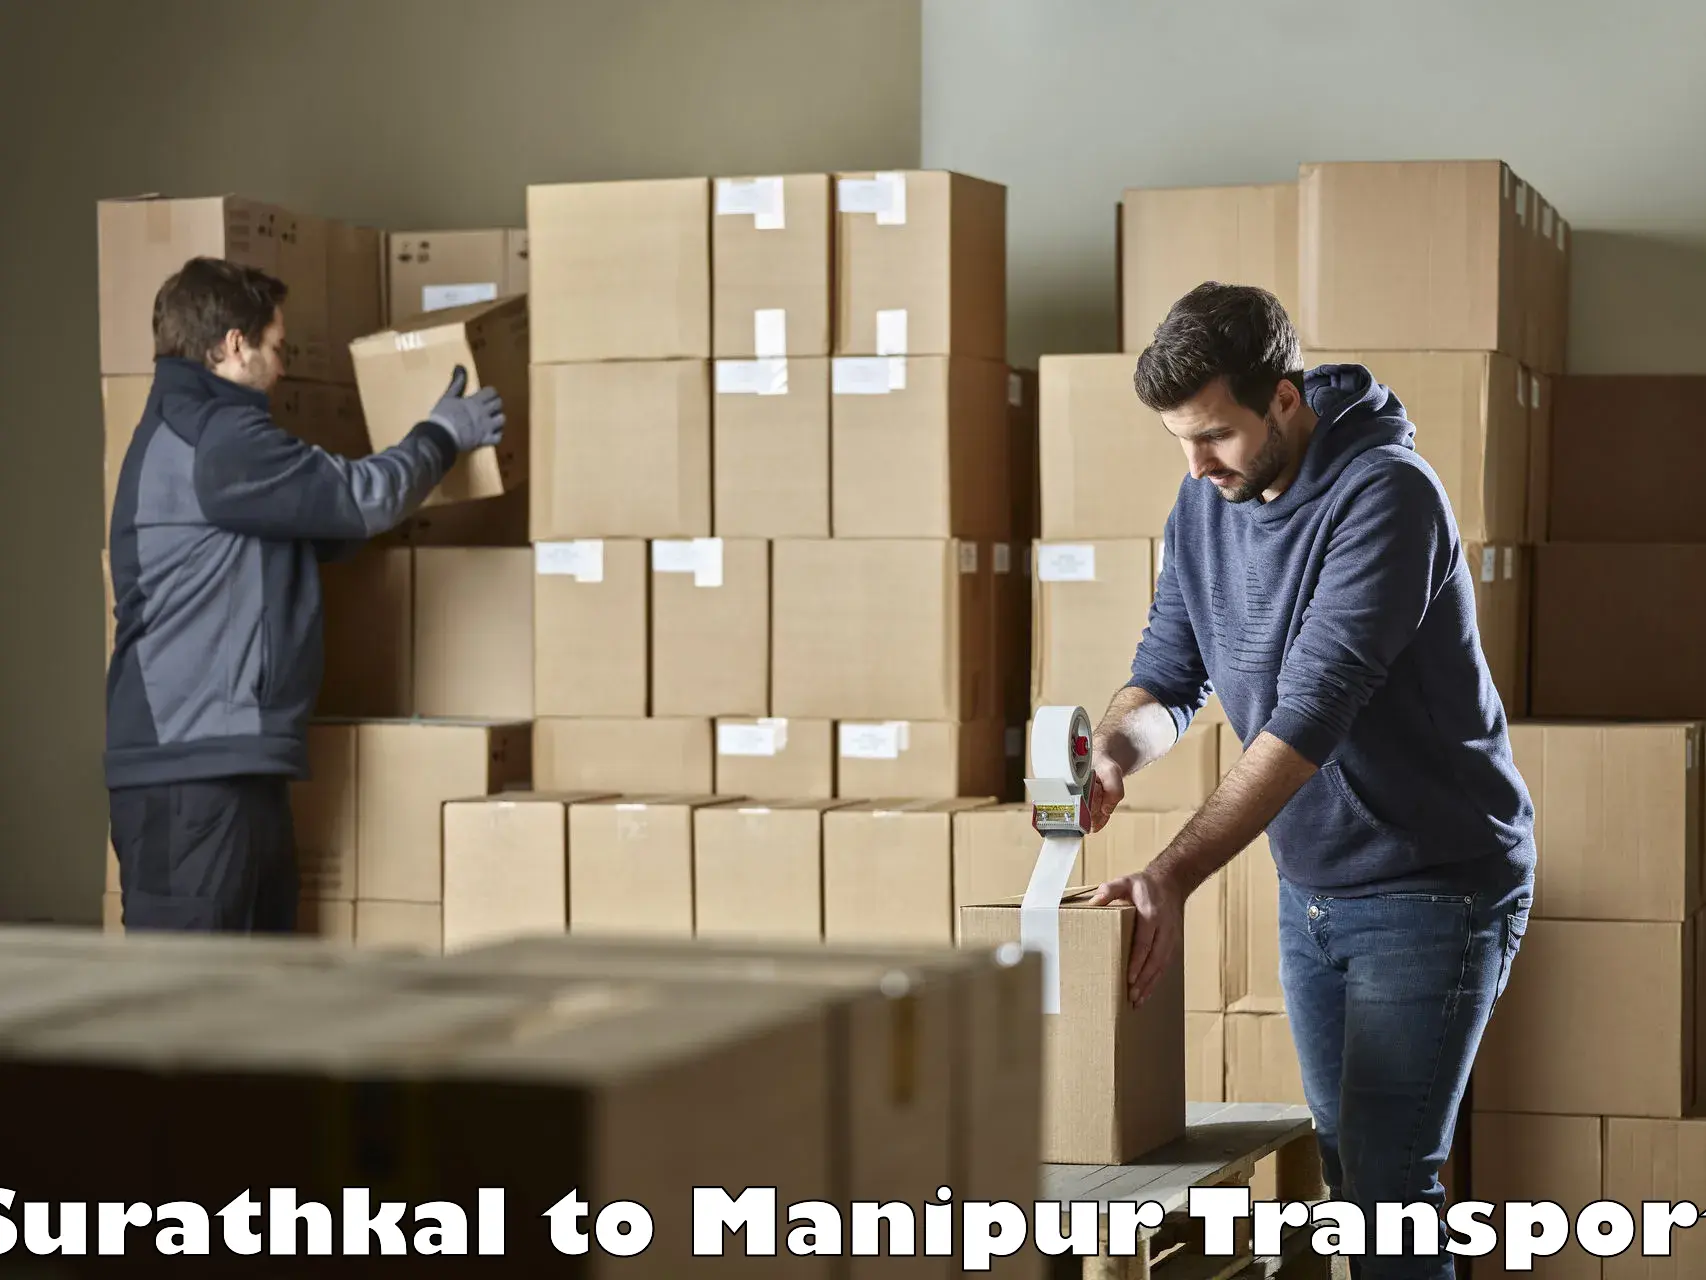 Truck transport companies in India Surathkal to Manipur